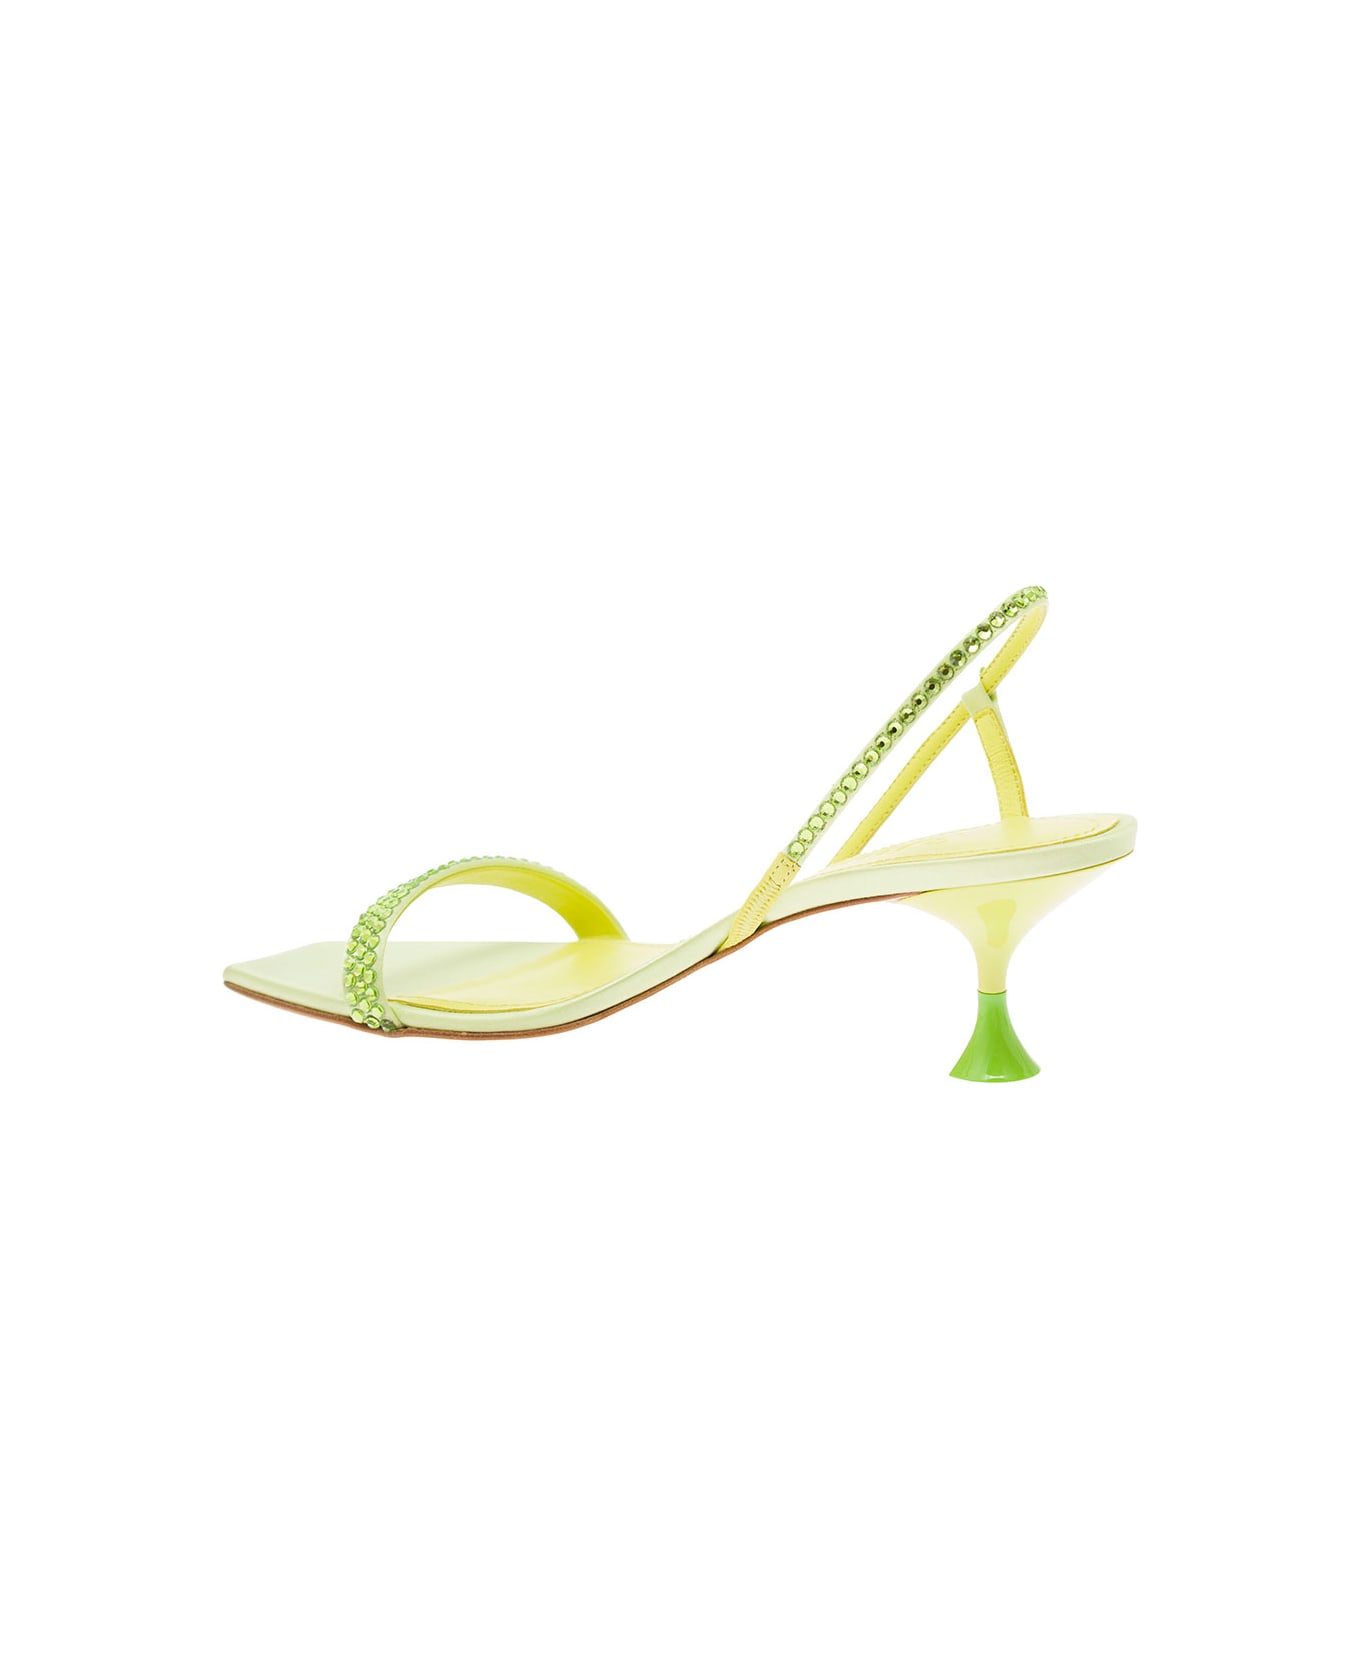 3JUIN 'eloise' Green Sandals With Rhinestone Embellishment And Spool Heel In Viscose Blend Woman - Yellow